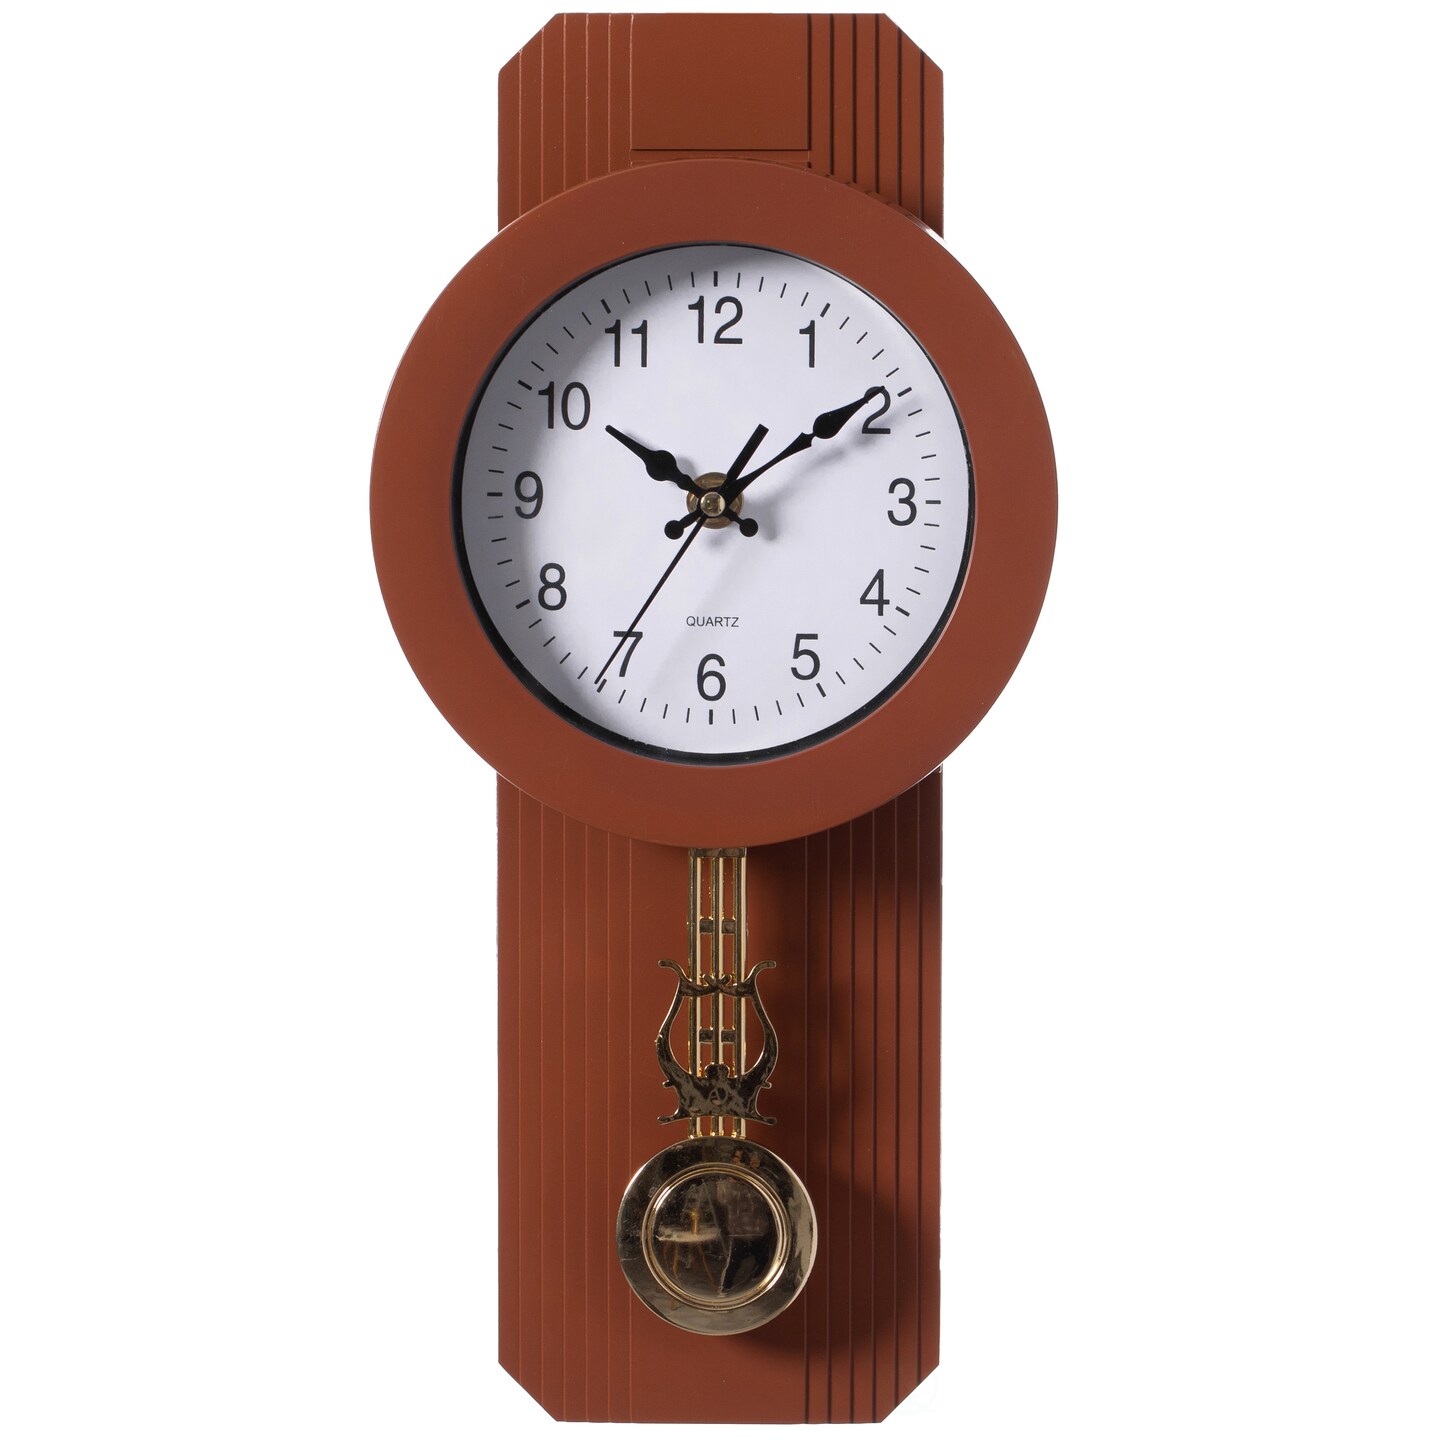 Plaza Brown Pendulum Wall Clock - diwar watch, home watch: Buy Plaza Brown  Pendulum Wall Clock - diwar watch, home watch at Best Price in India on  Snapdeal